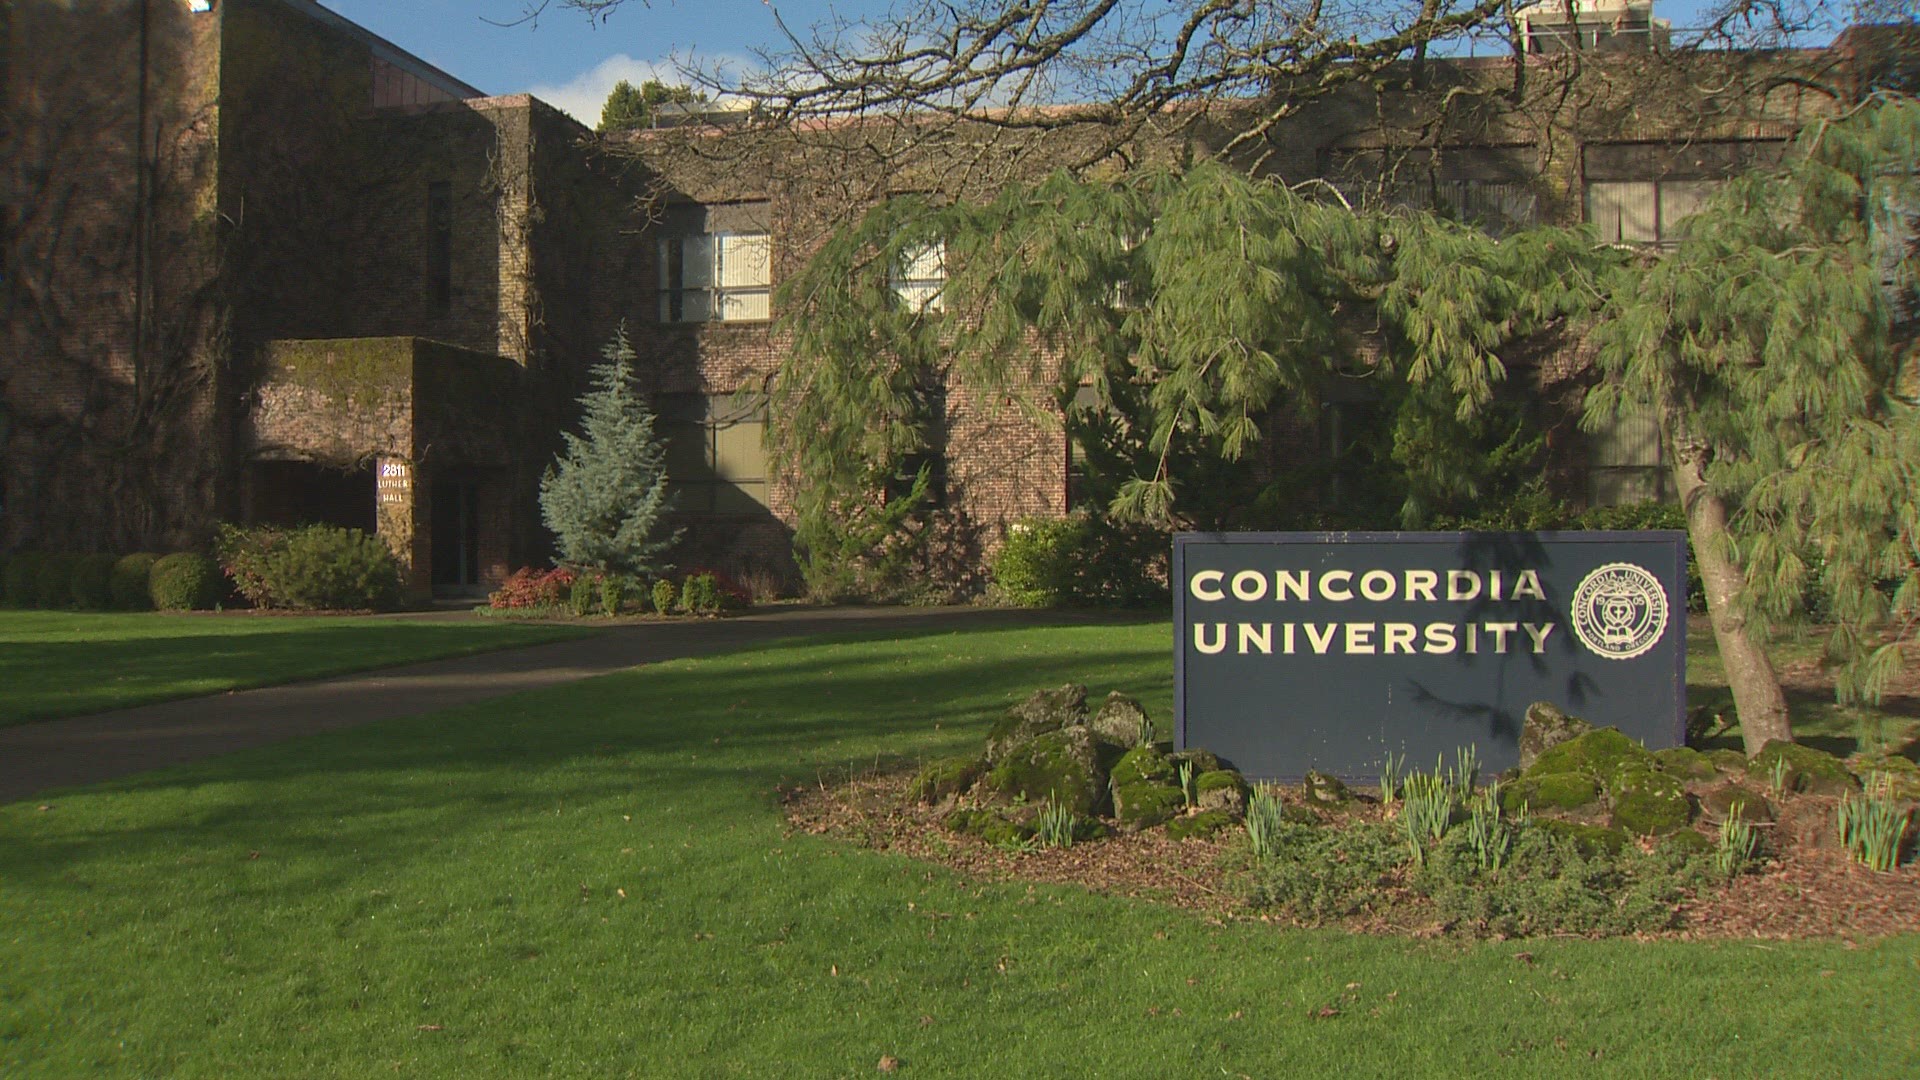 Concordia University in northeast Portland will close its doors at the end of the 2020 spring term, according to Interim President Tom Ries.